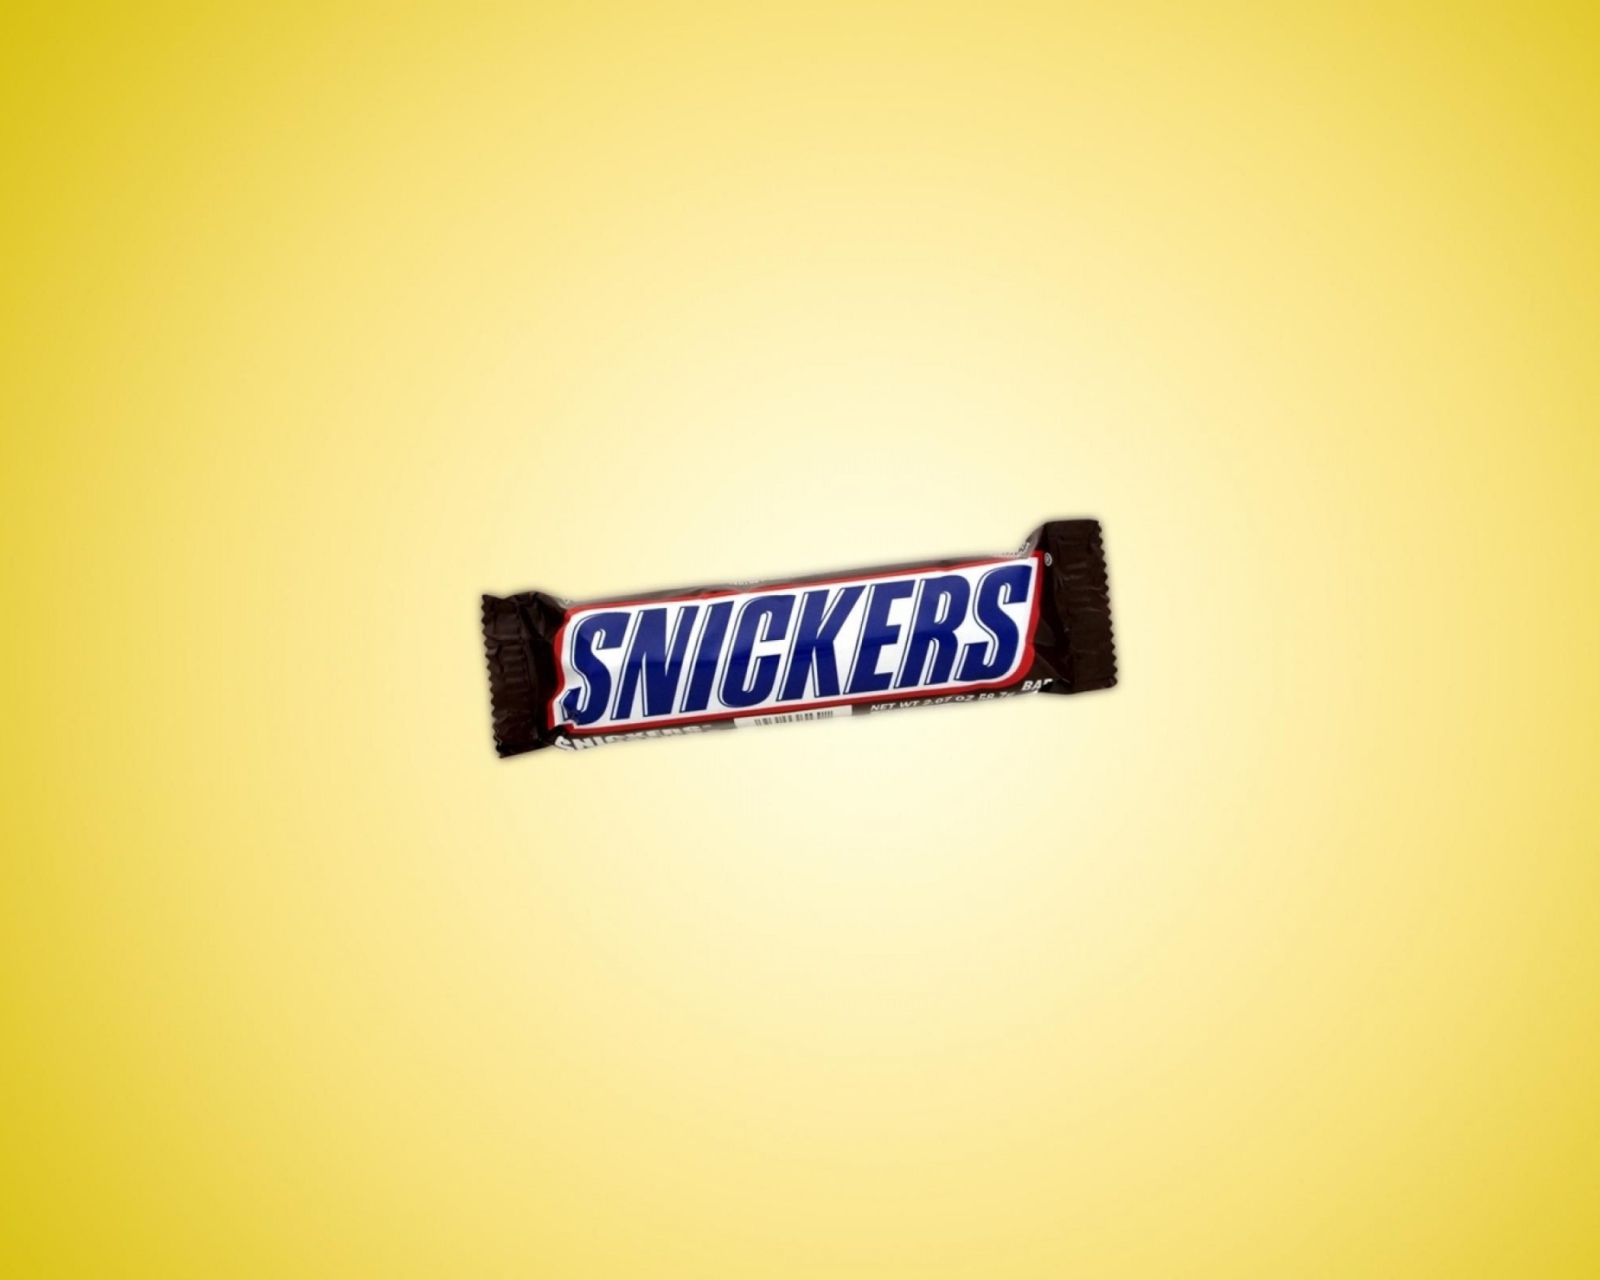 Das Snickers Chocolate Wallpaper 1600x1280